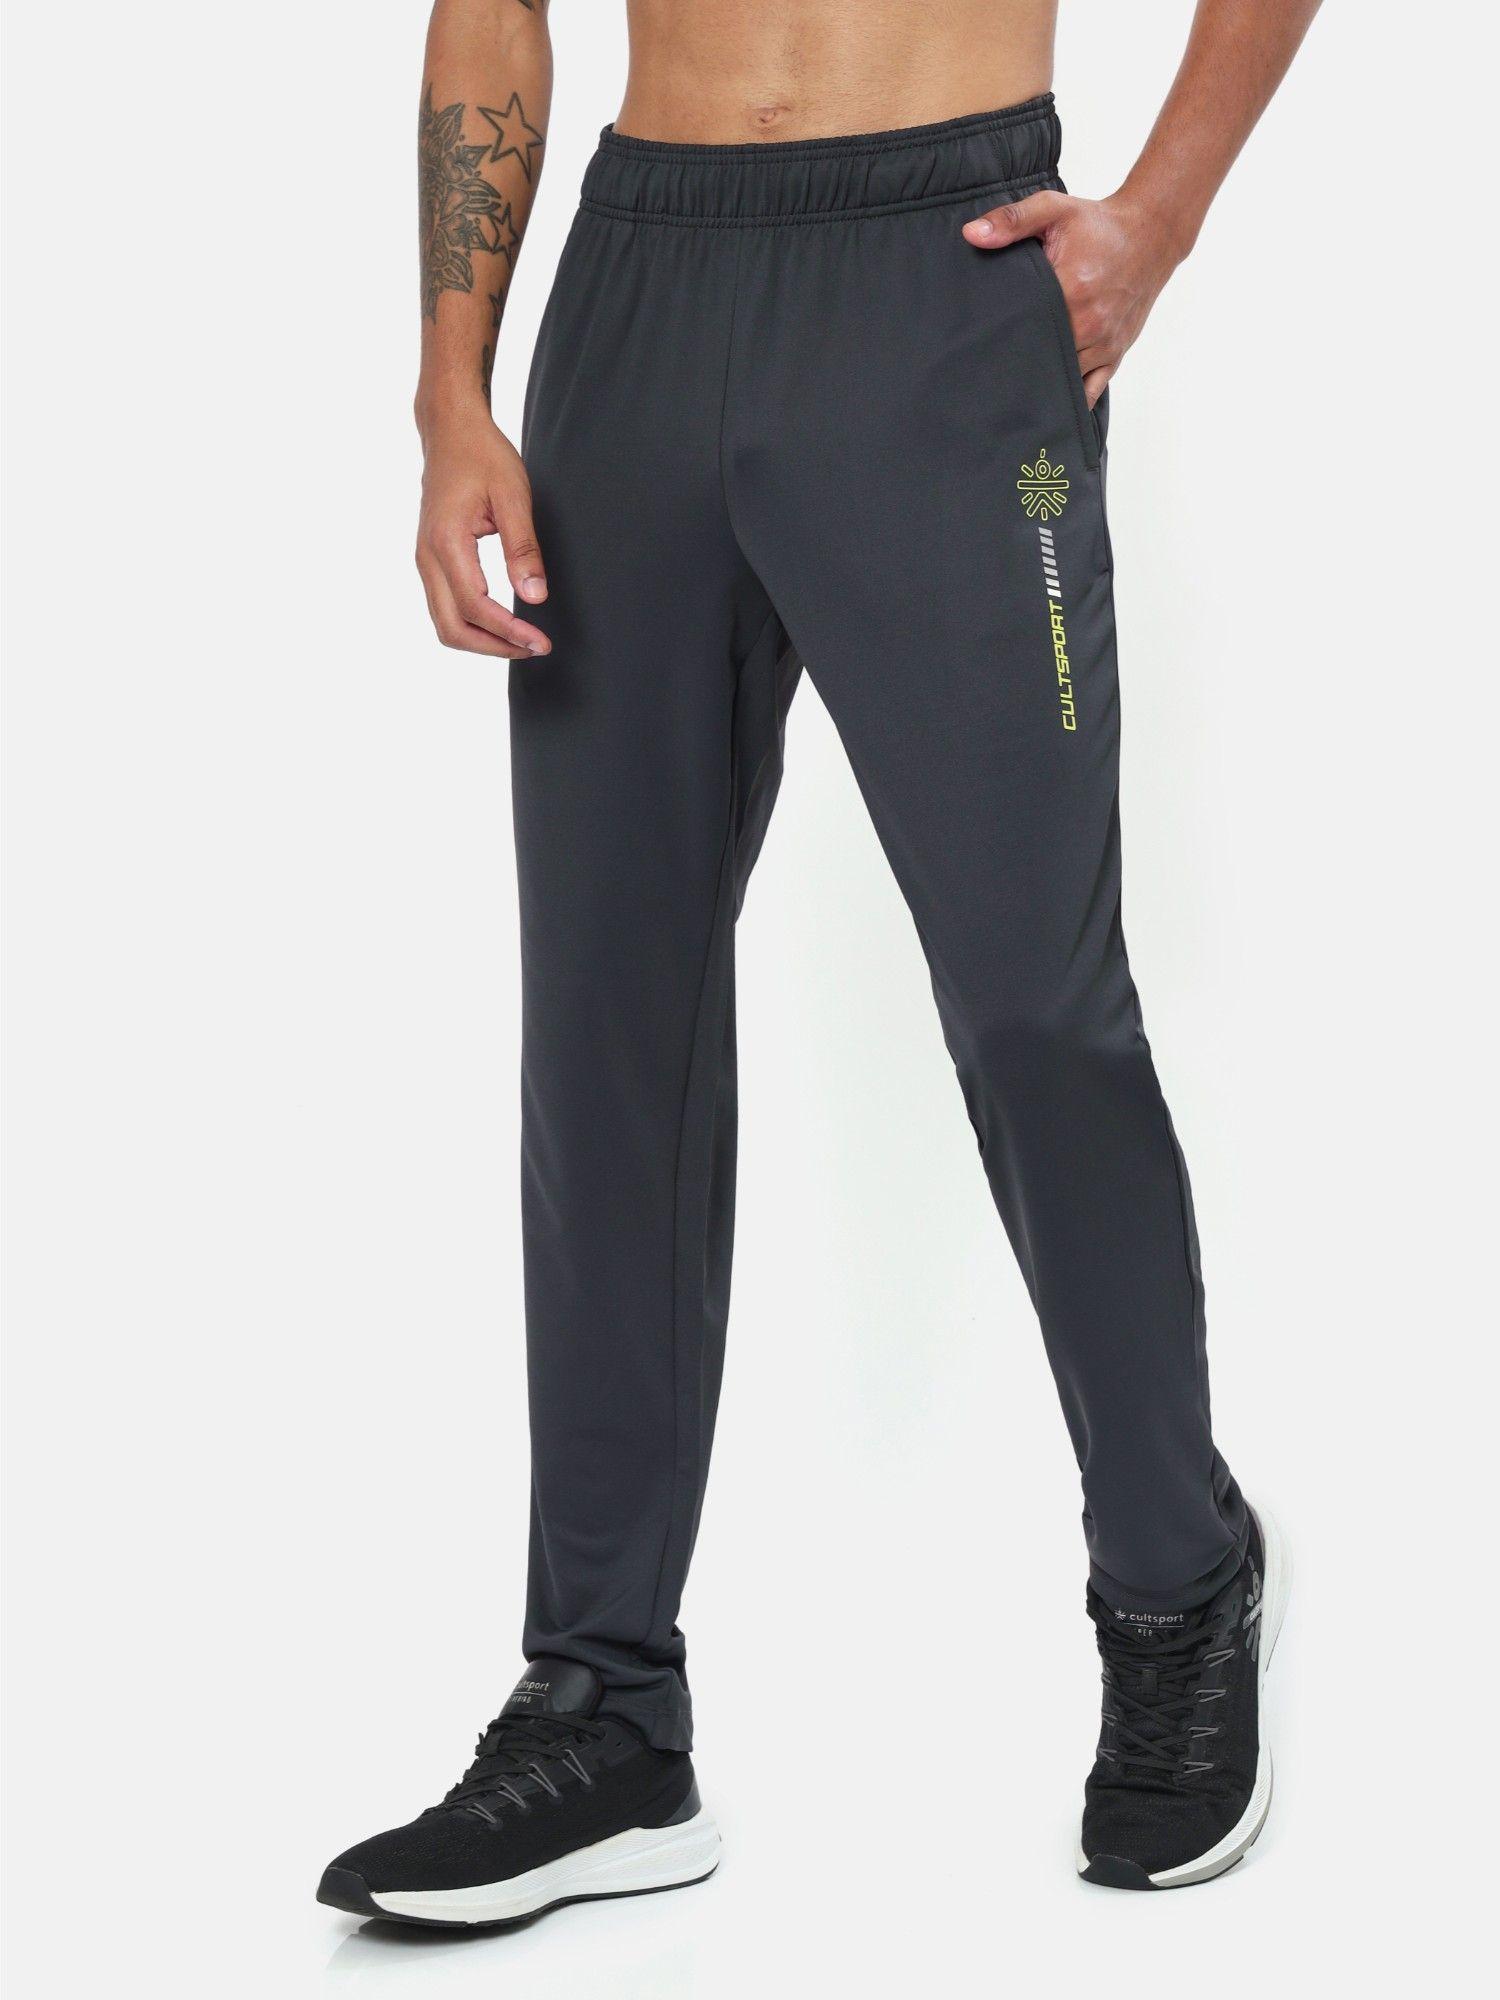 grey-active-polyester-track-pants-with-graphic-print